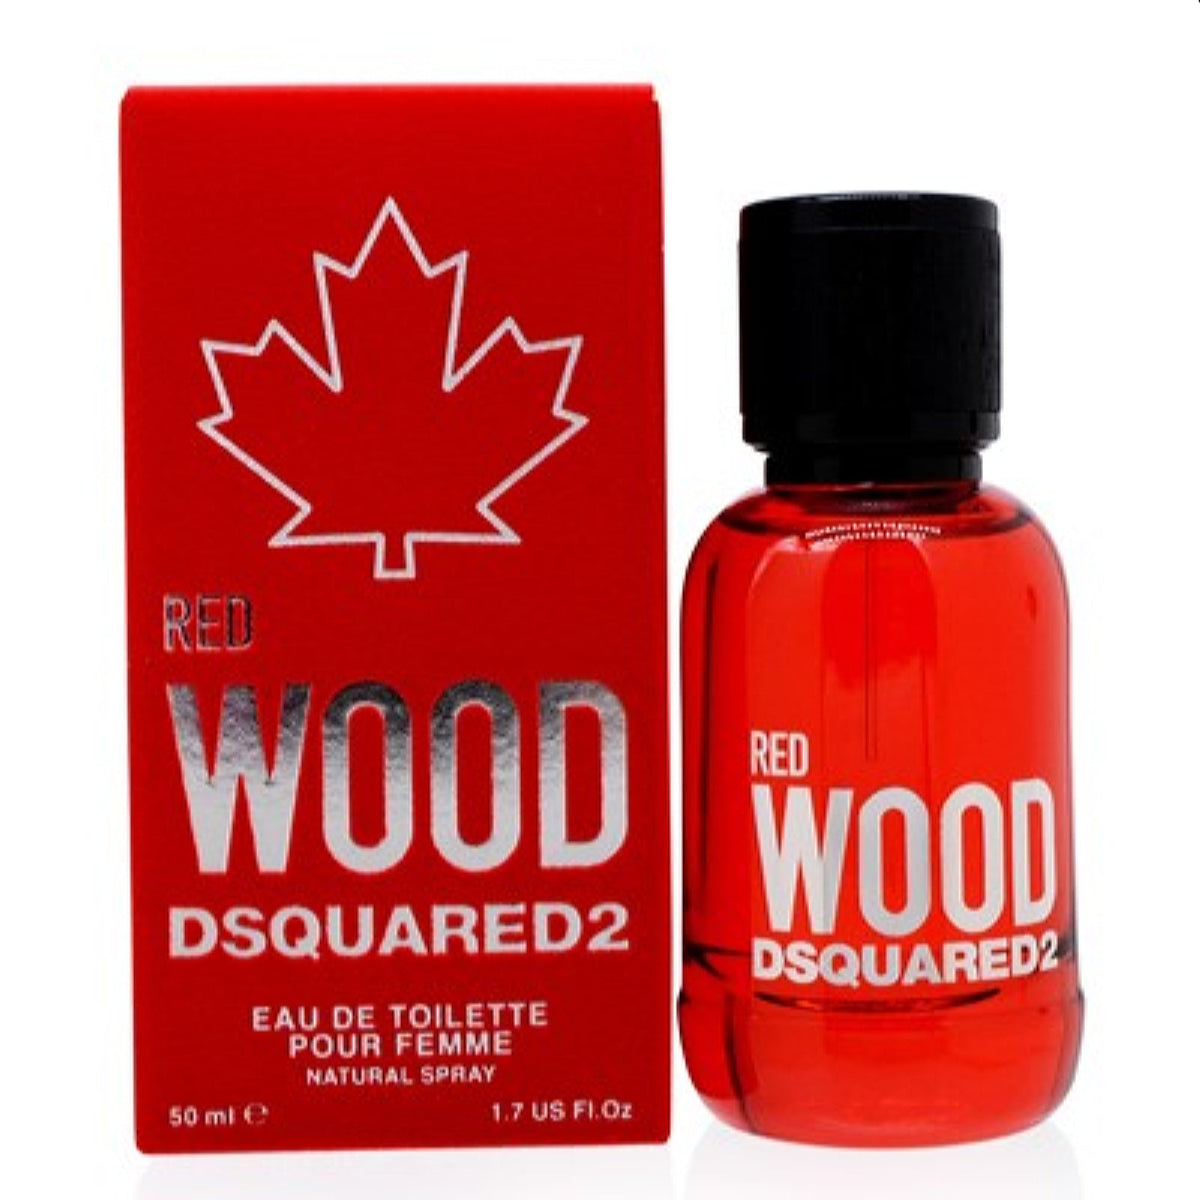 Red Wood Dsquared2 Edt Spray 1.7 Oz (50 Ml) For Women  5C30